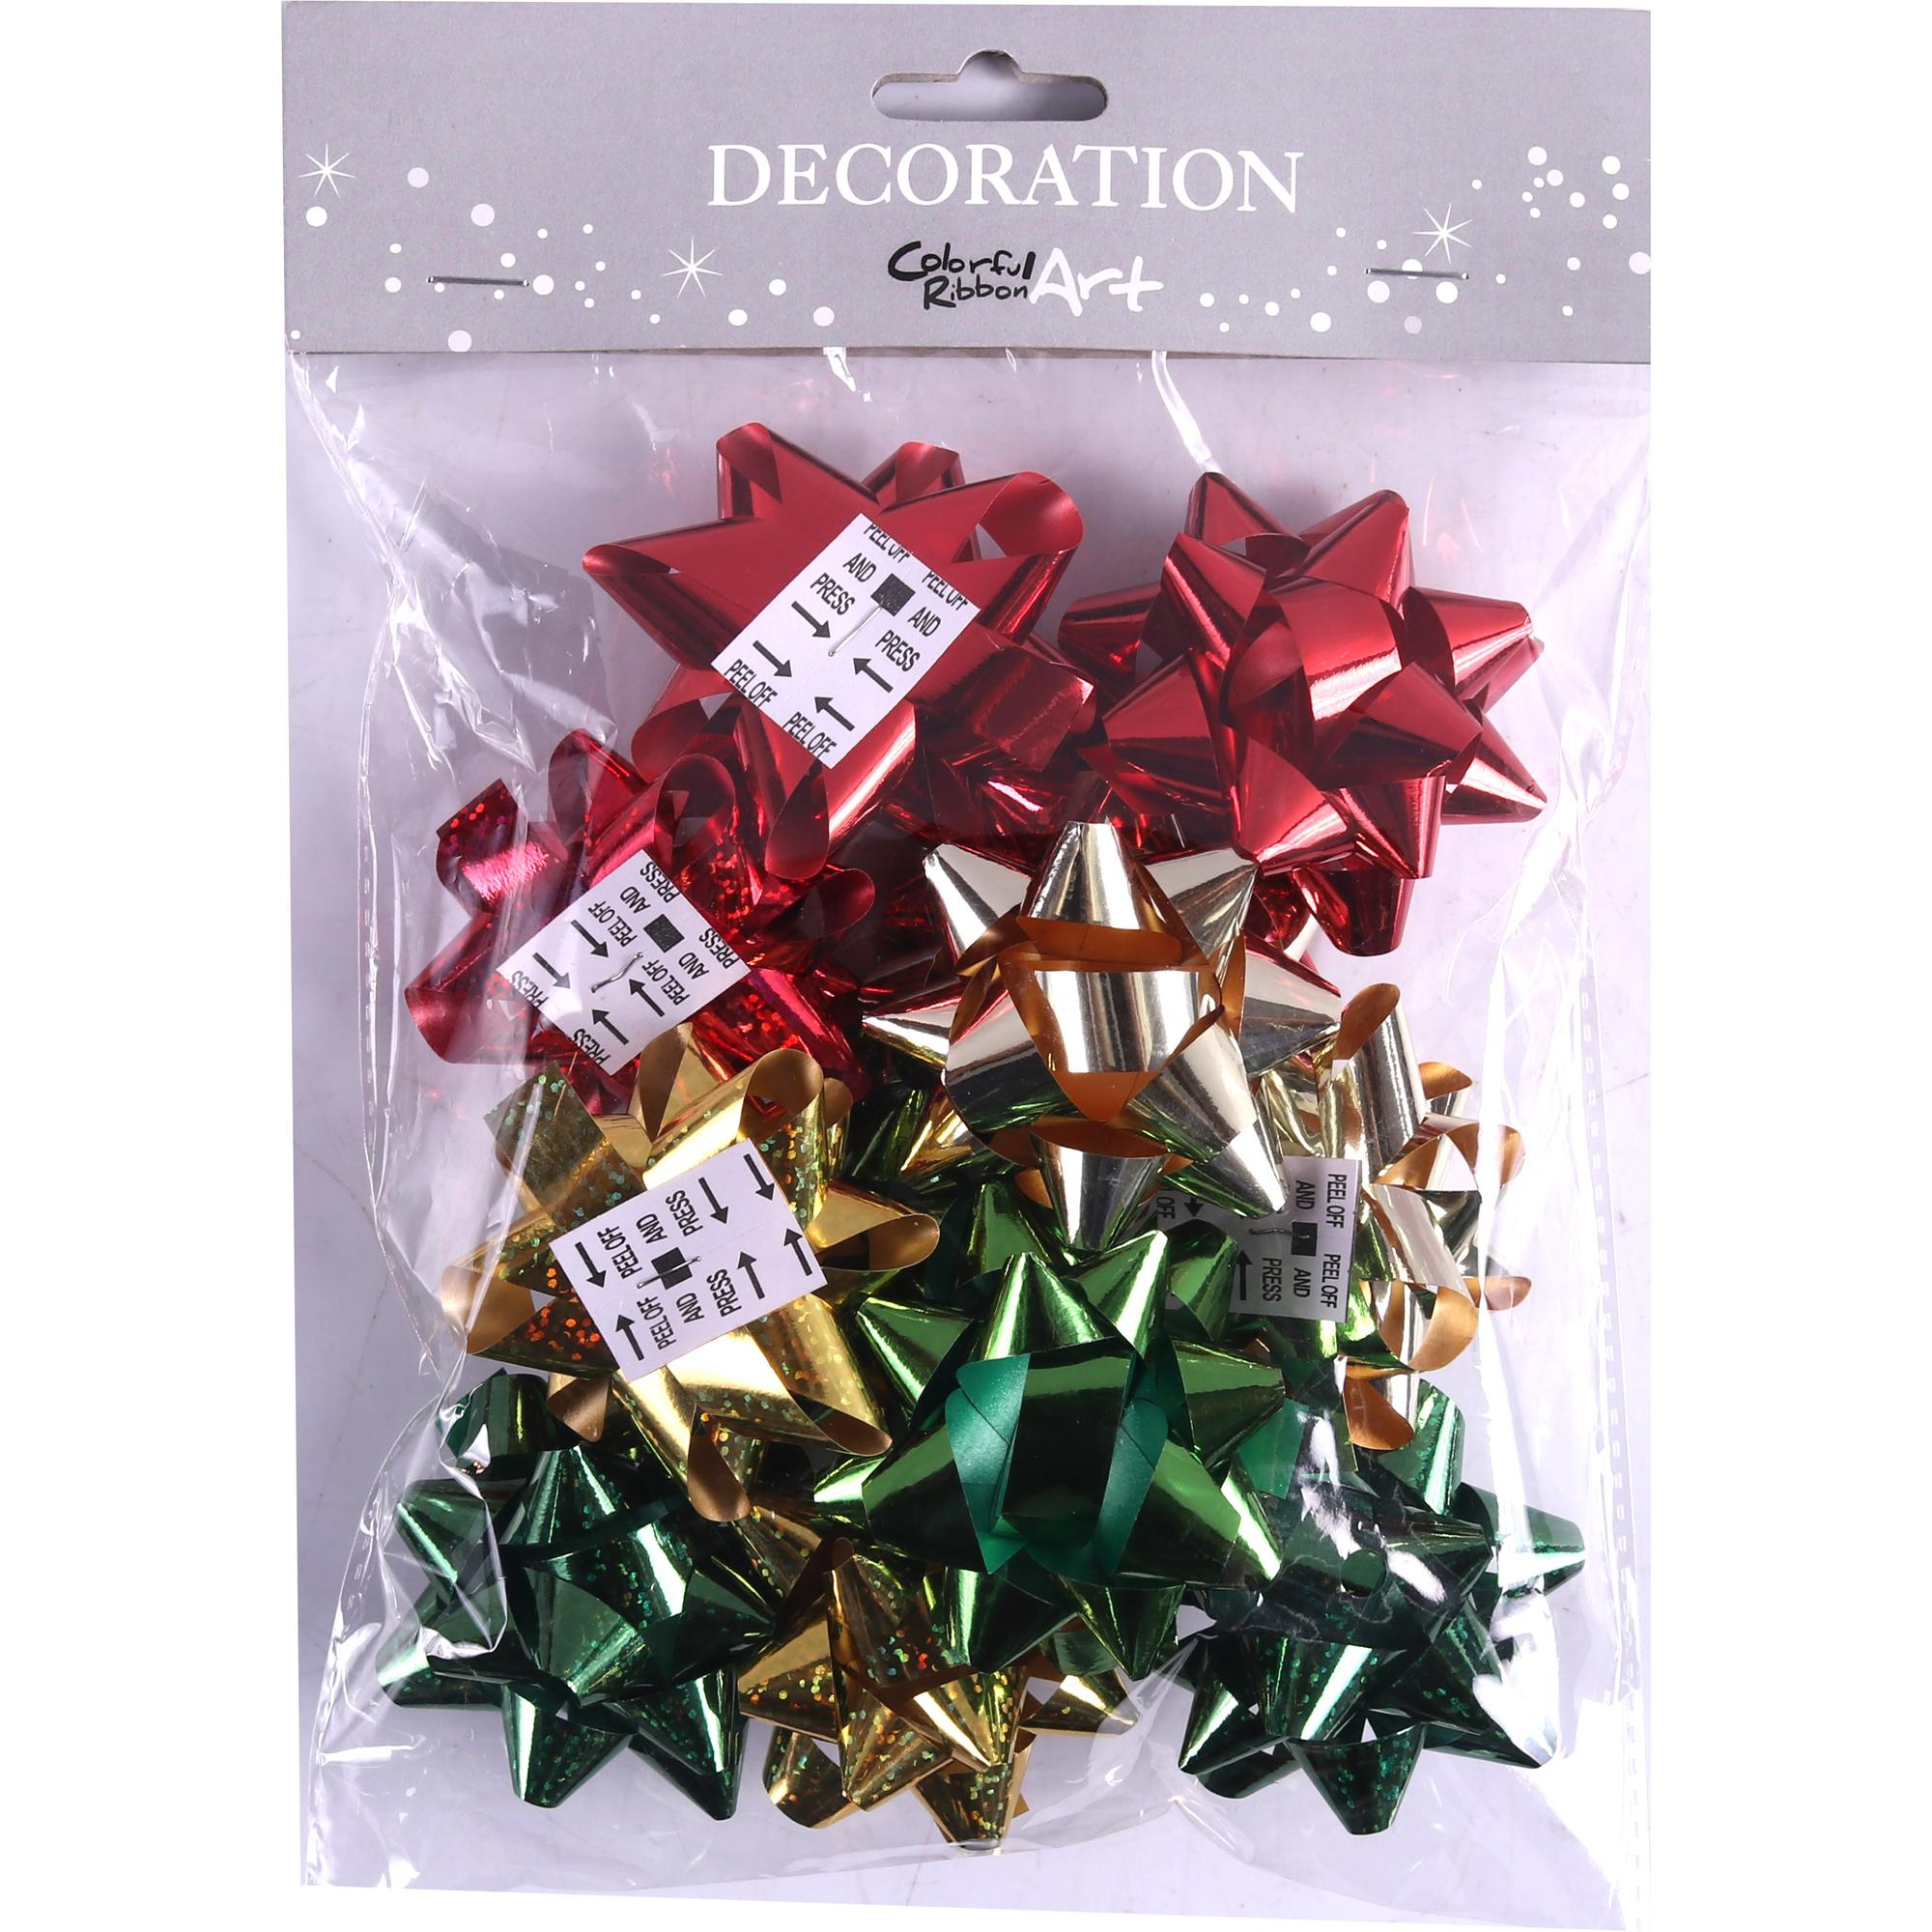 ASSORTED SATIN GIFT BOWS 12PZ 2.5 INCH - 786-8070668